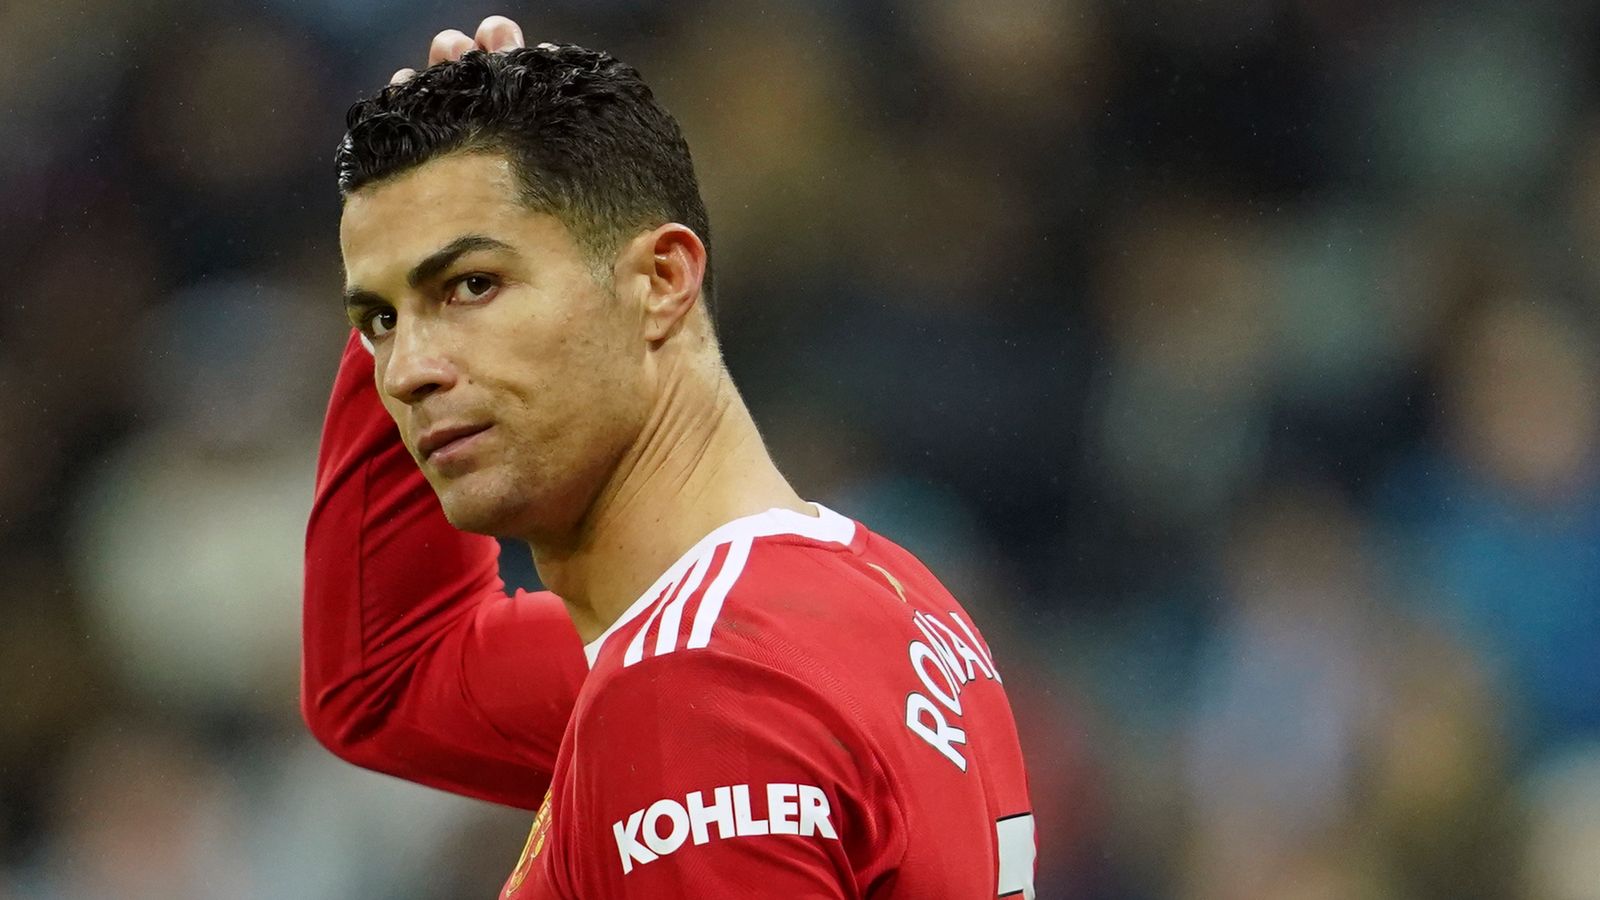 Cristiano Ronaldo: Erik ten Hag says Manchester United forward is in his plans and not